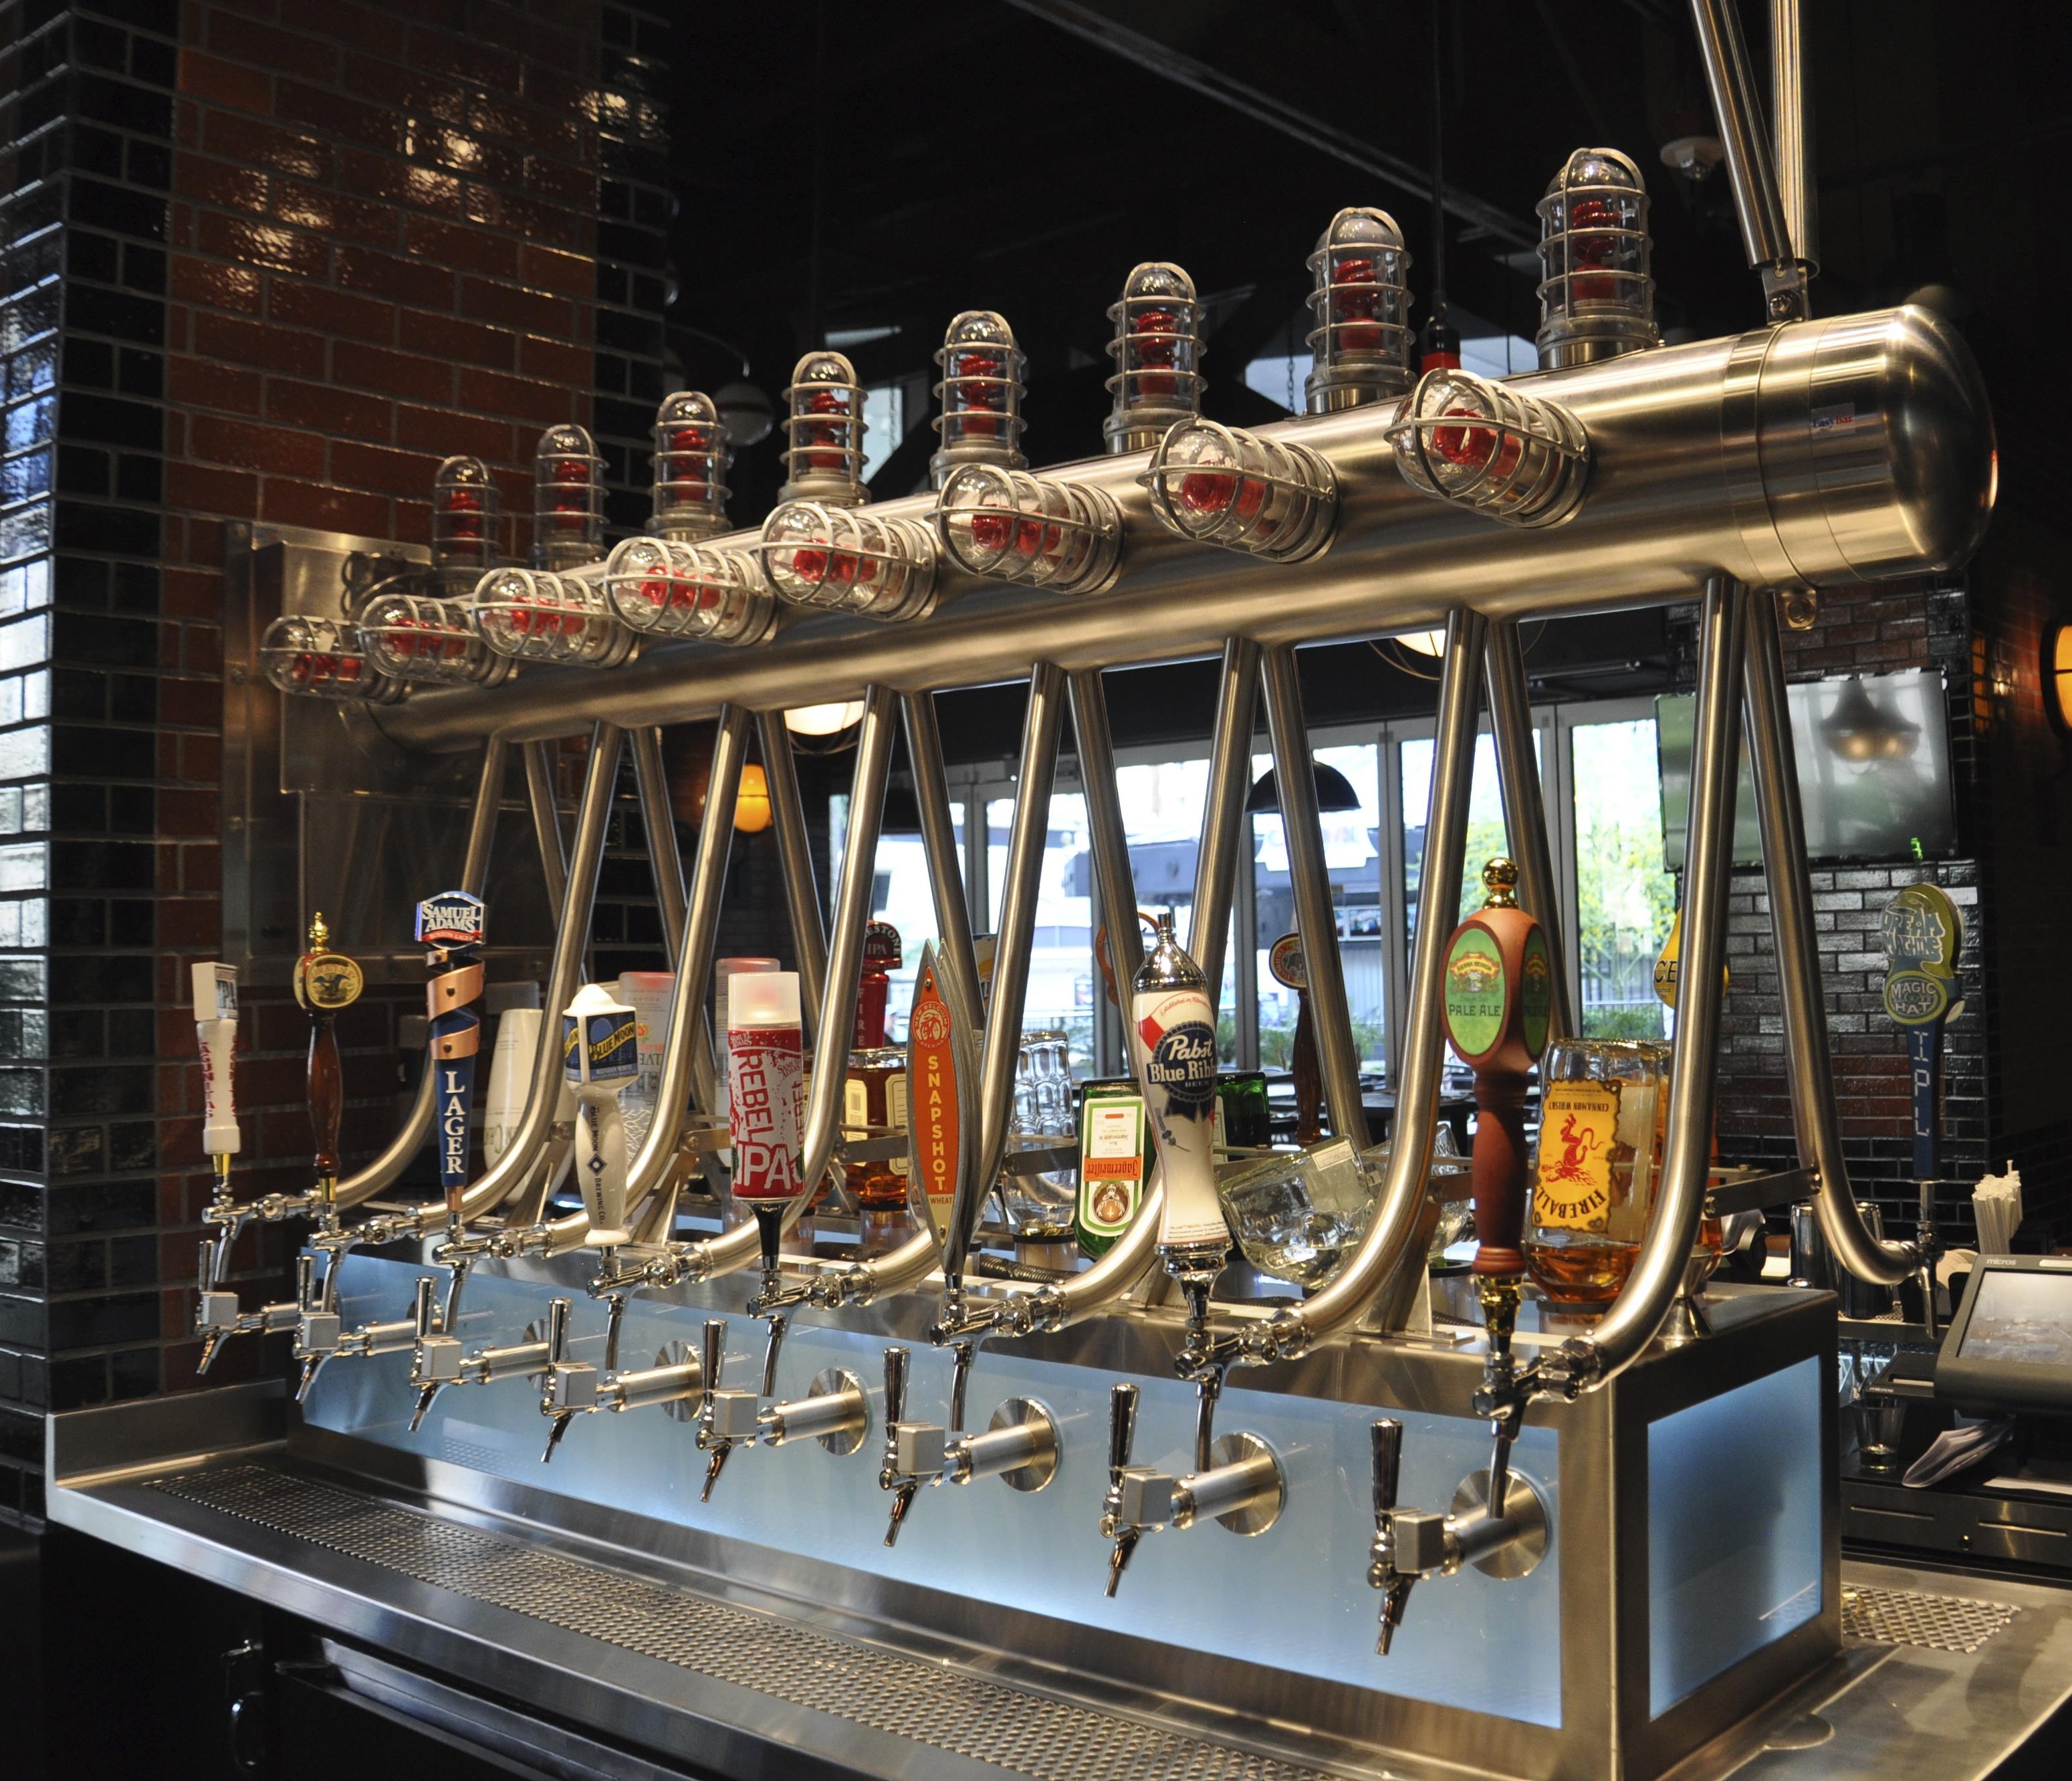 Draft Beer Towers - What's the Best Mounting Location?